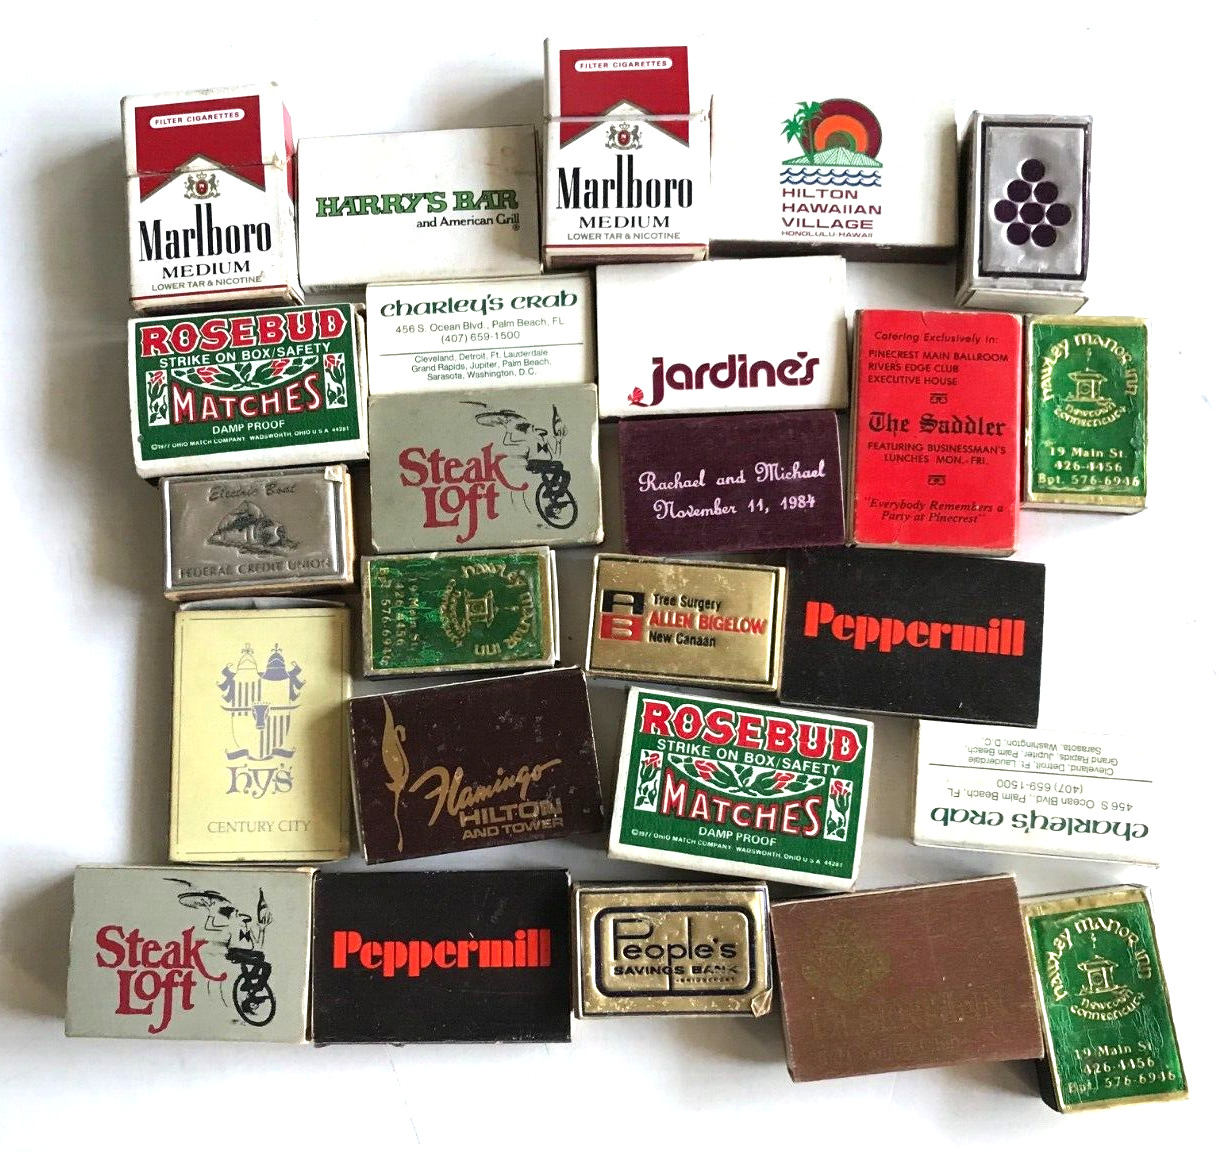 24 MATCH BOXES MARLBORO  PEPPERMILL ROSEBUD + OTHERS - ALL EMPTY: NO MATCHES